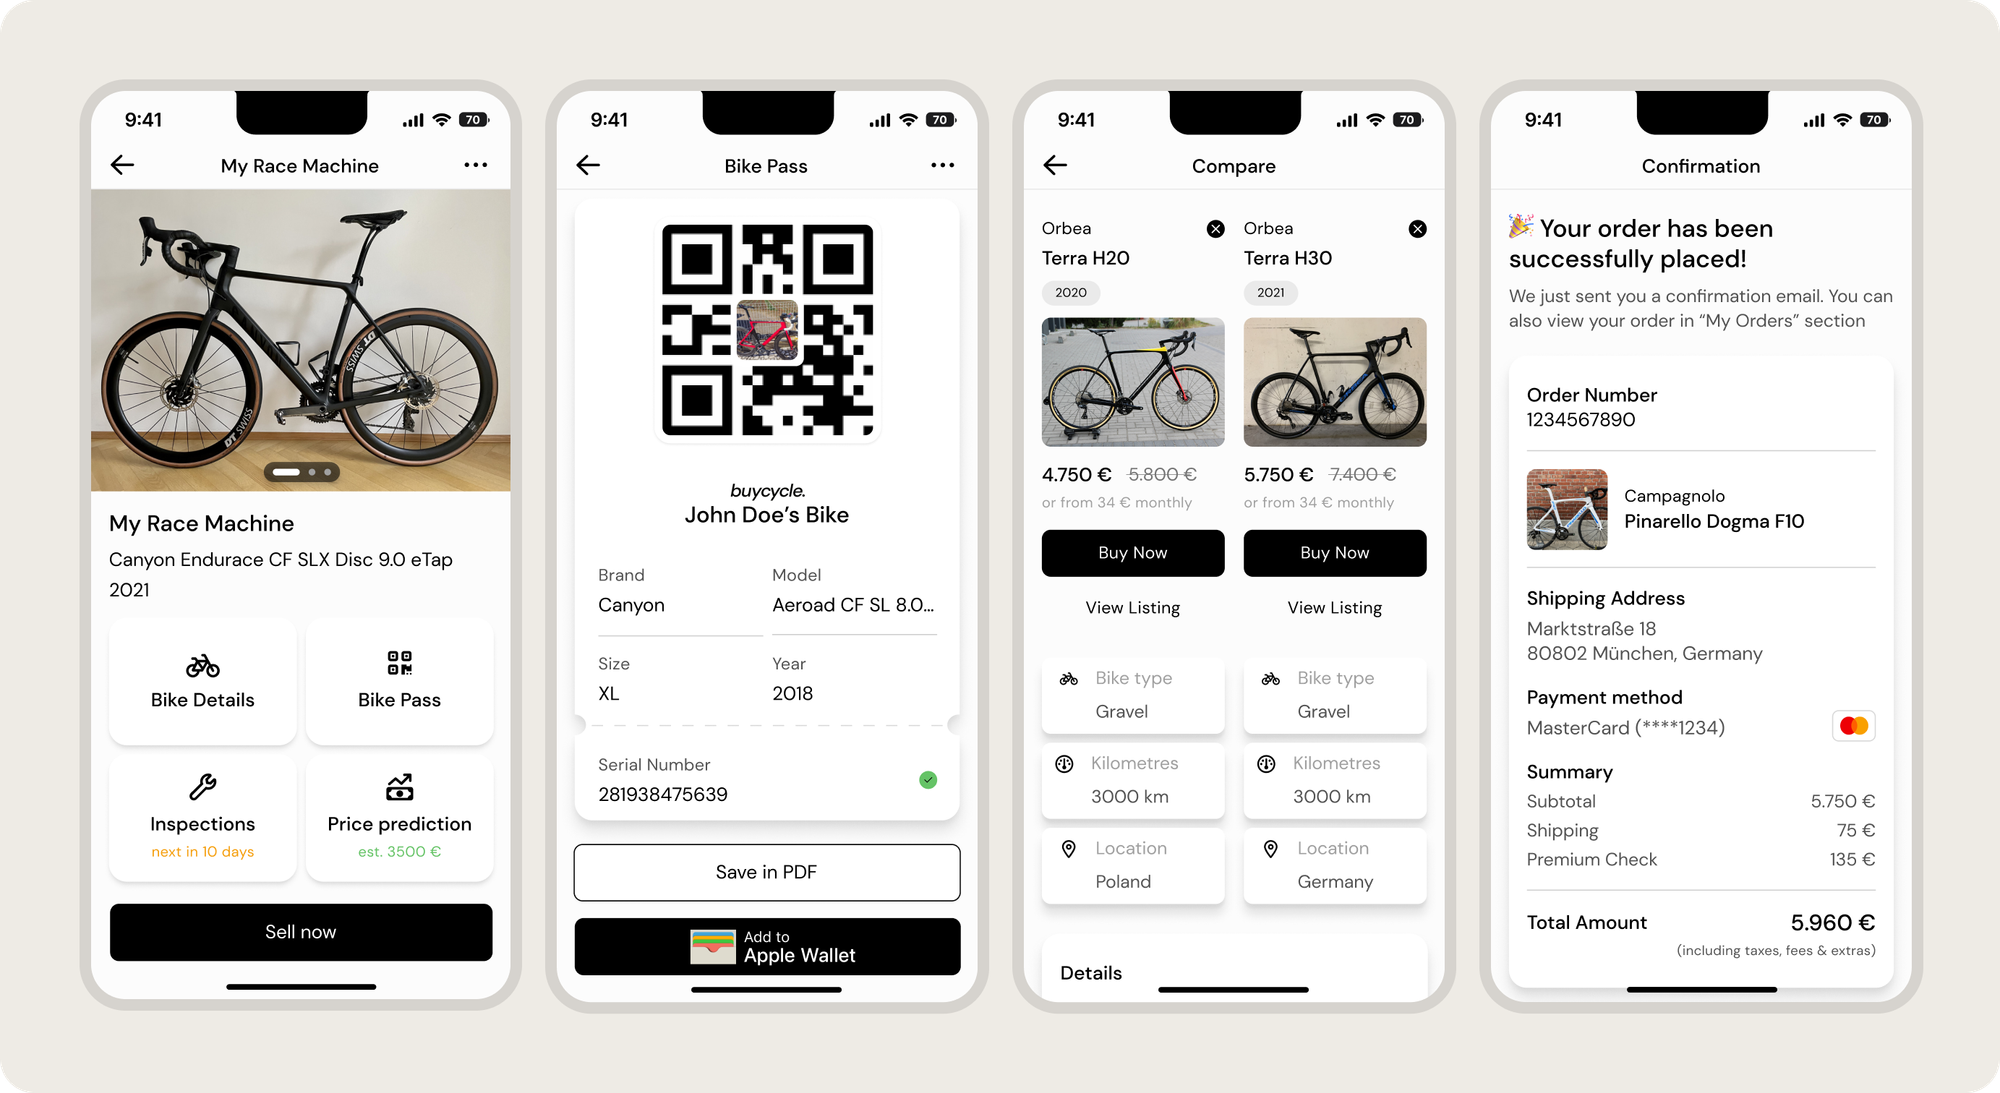 buycycle - Redefining Biking Culture with Sustainable Mobility